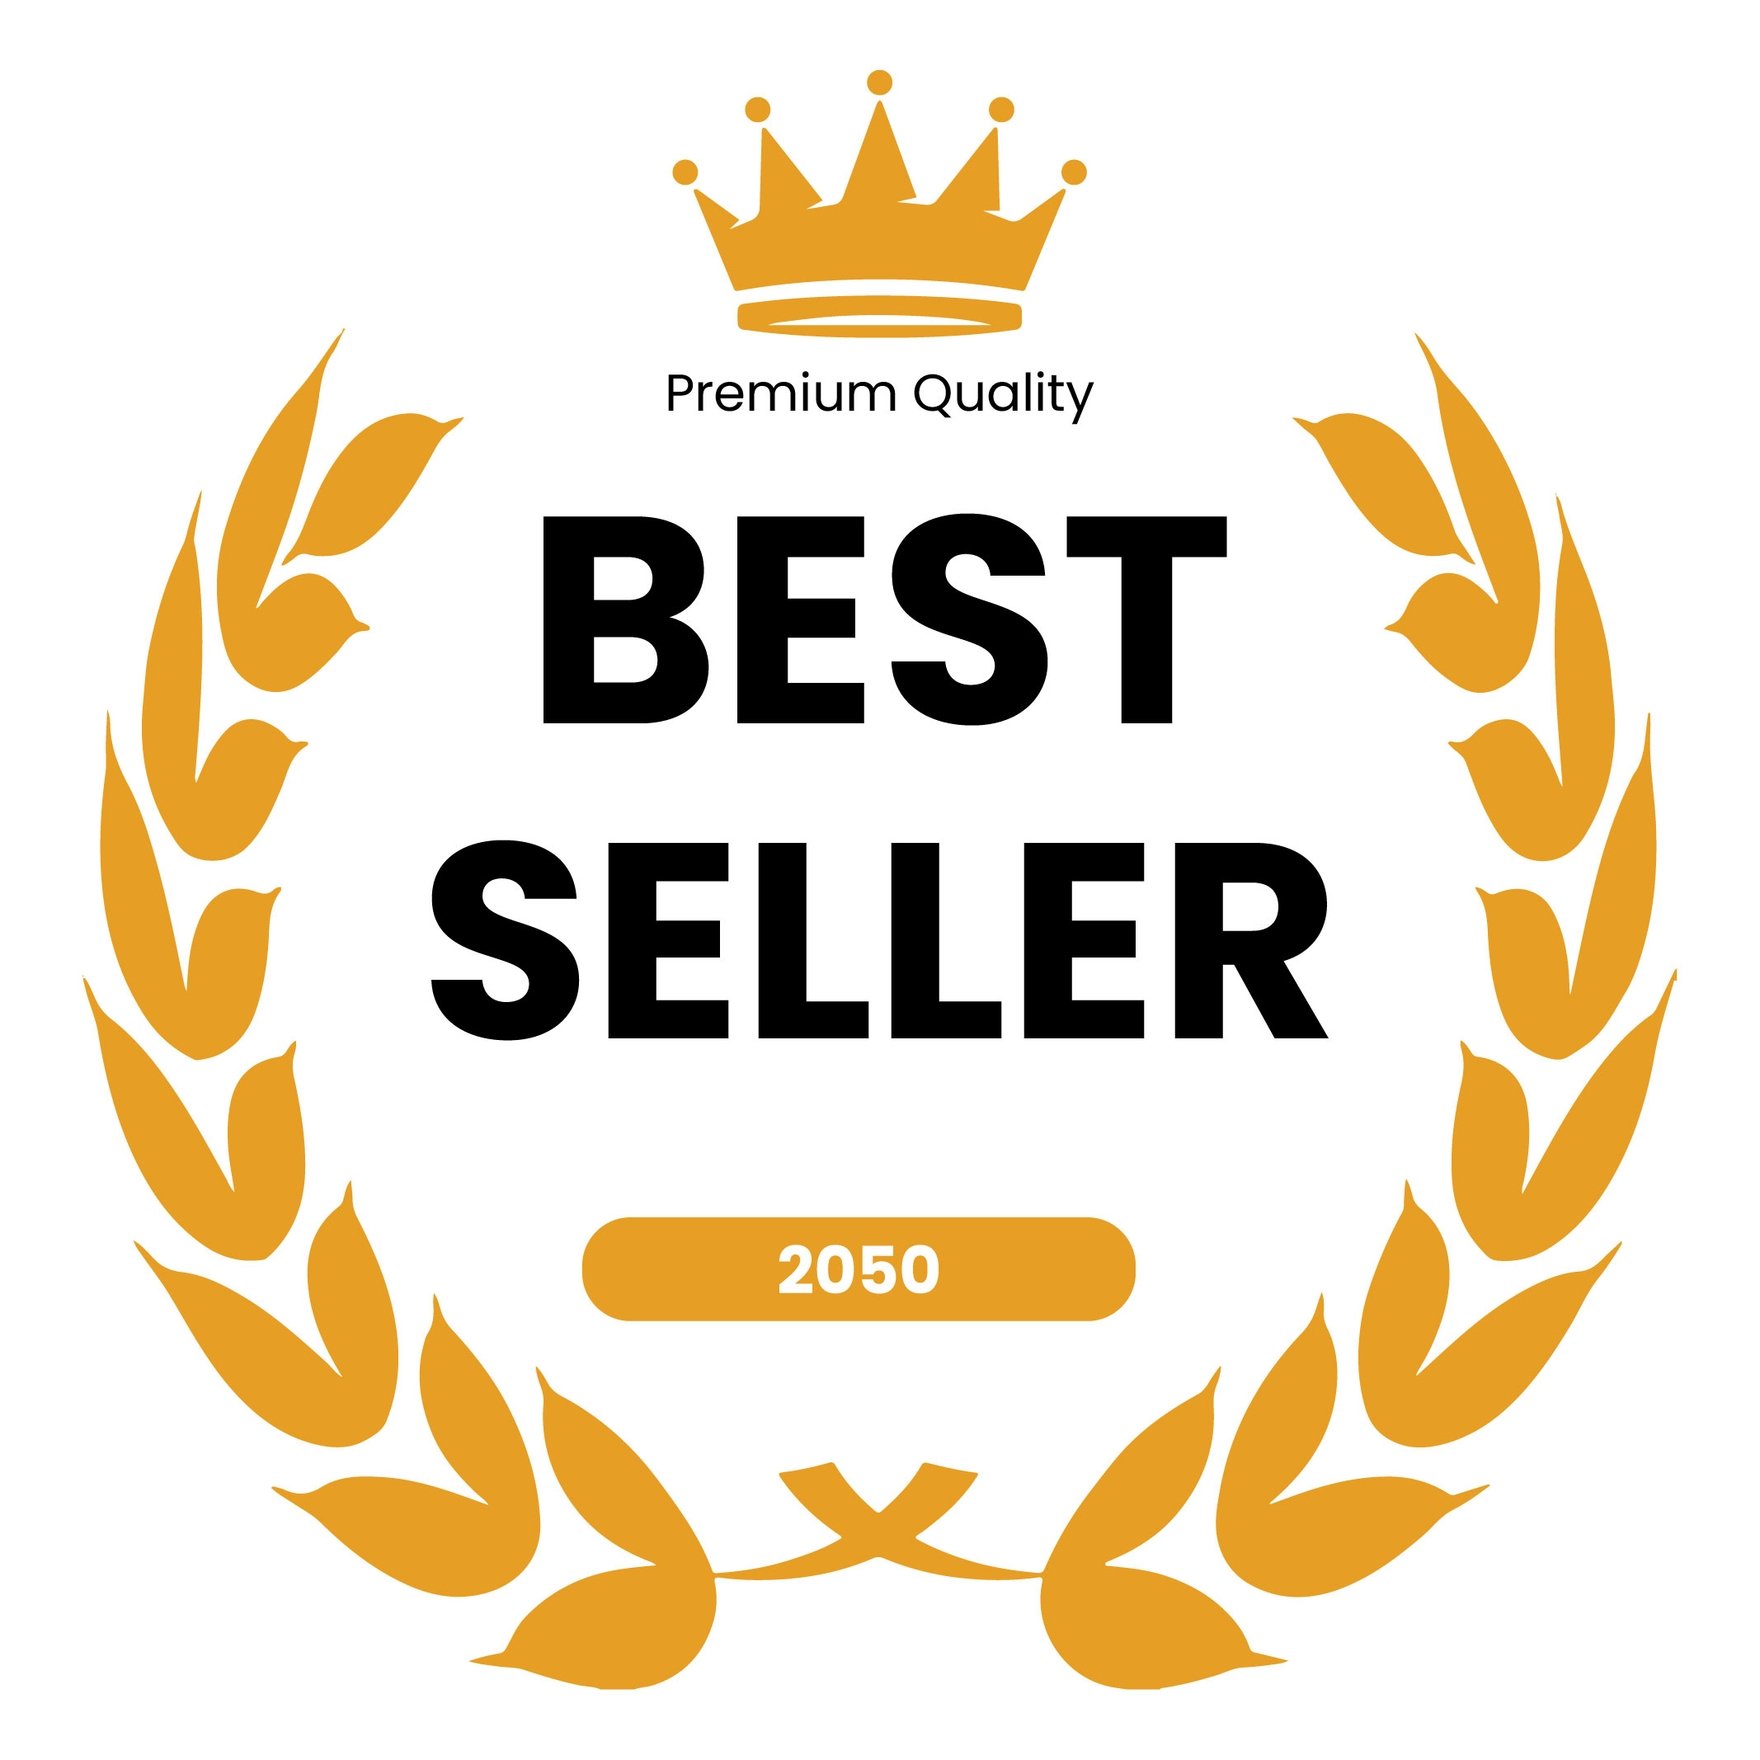 How to Get an  Best Seller Badge [UPDATED 2021]